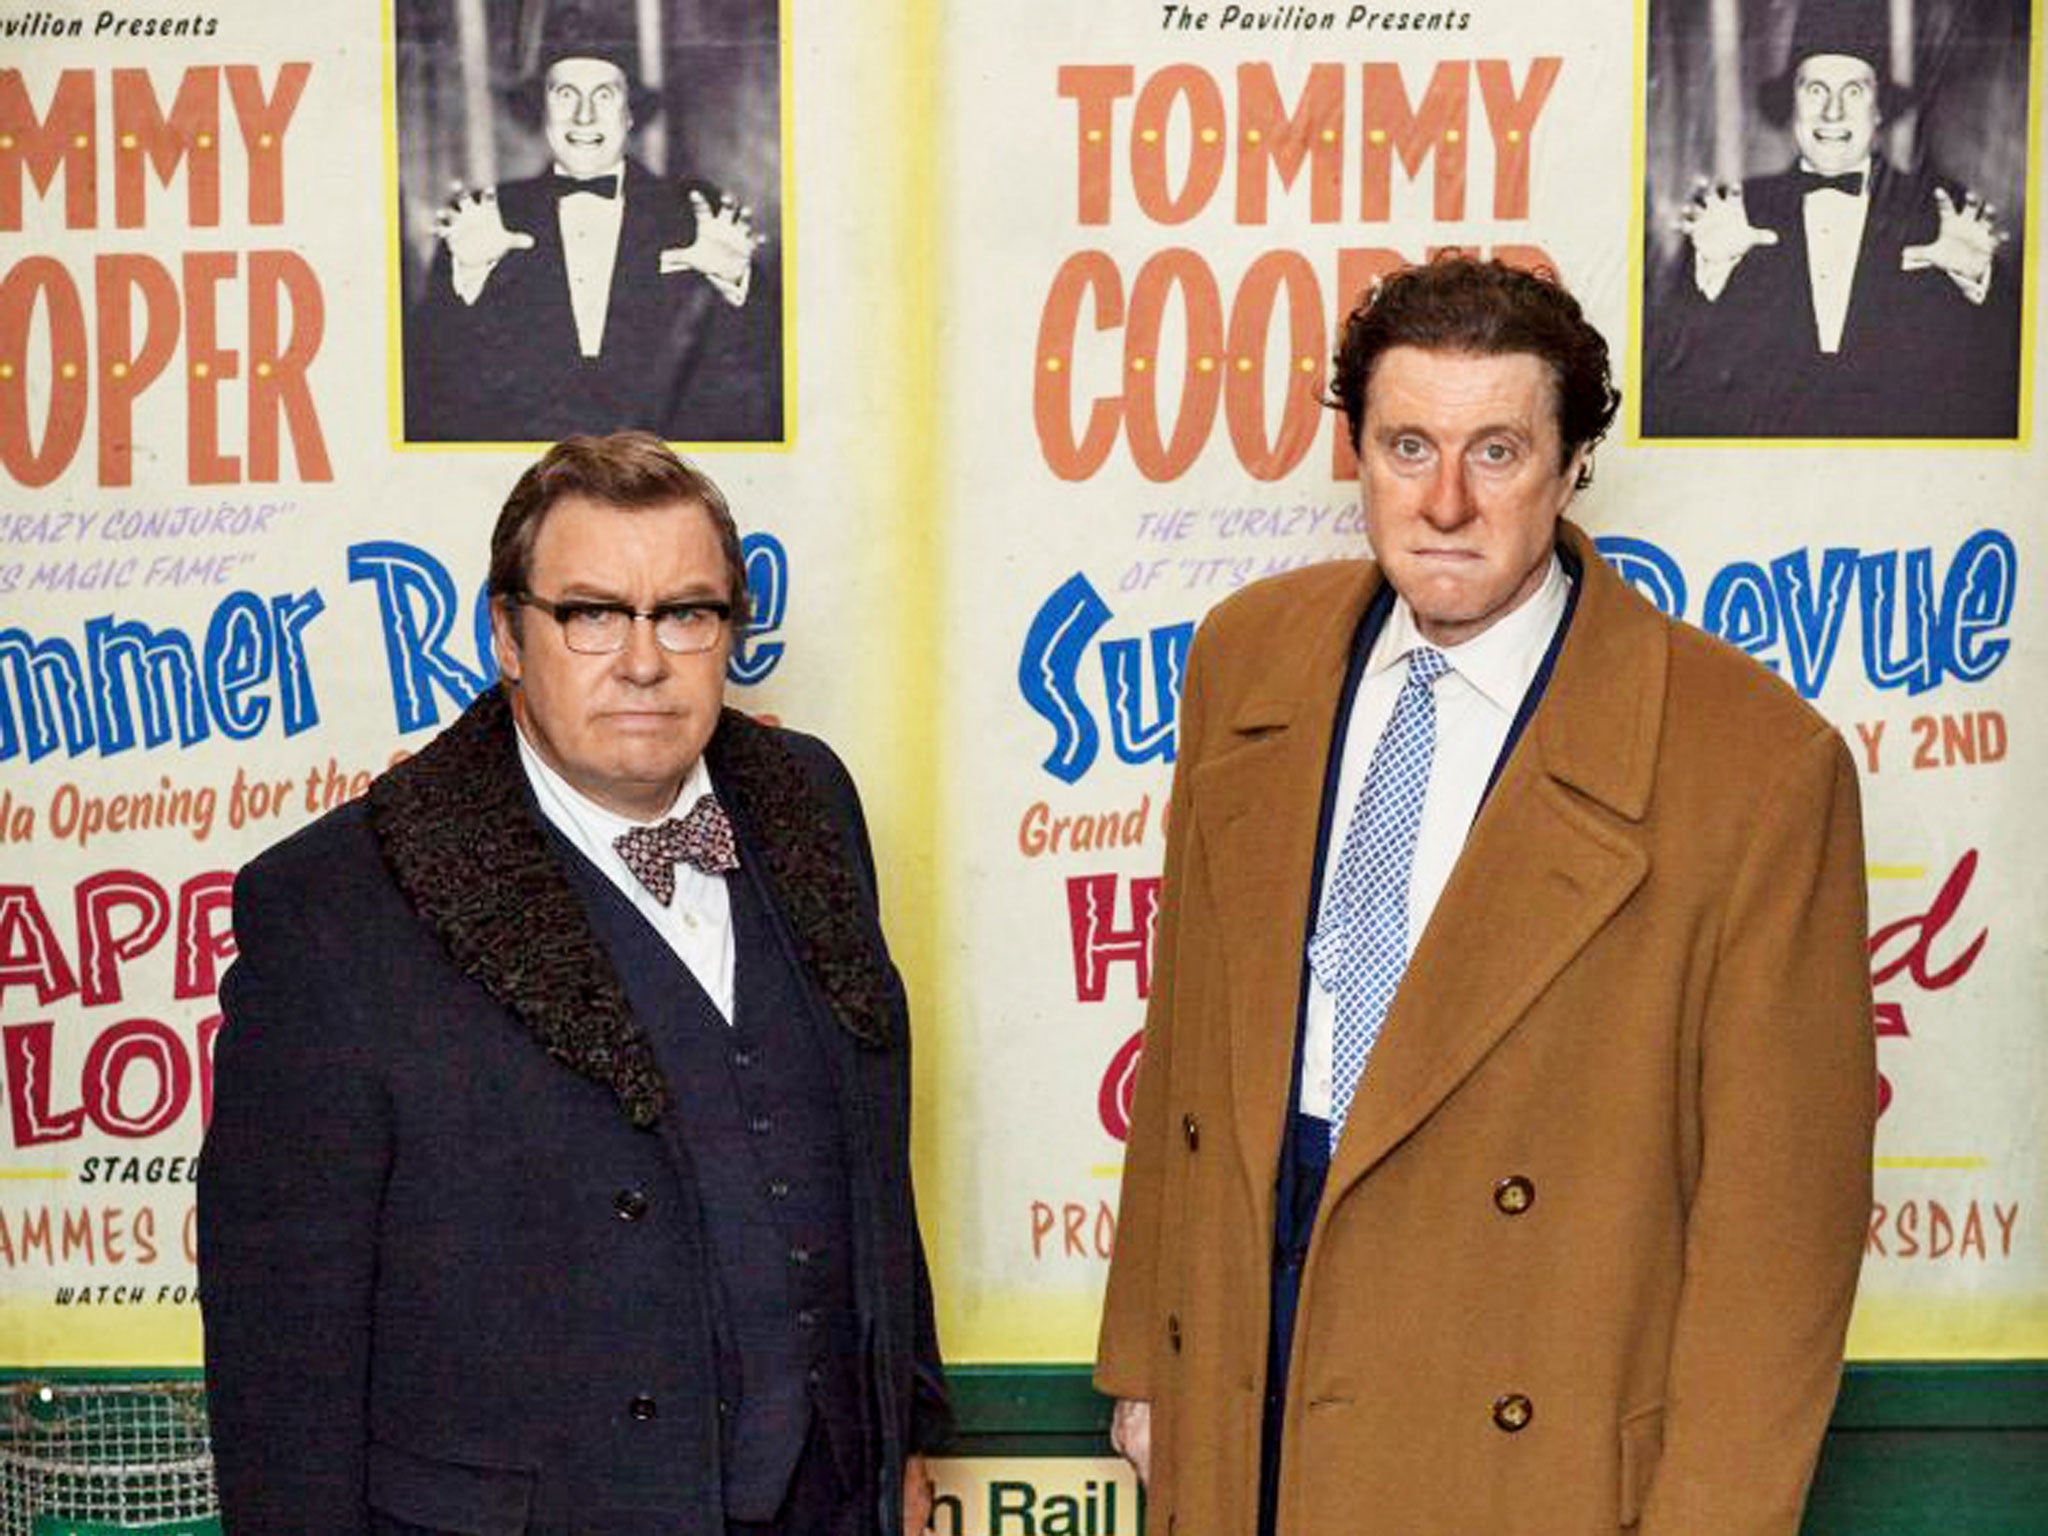 Tommy Cooper: Not Like That, Like This, ITV - TV review: 'Tommy